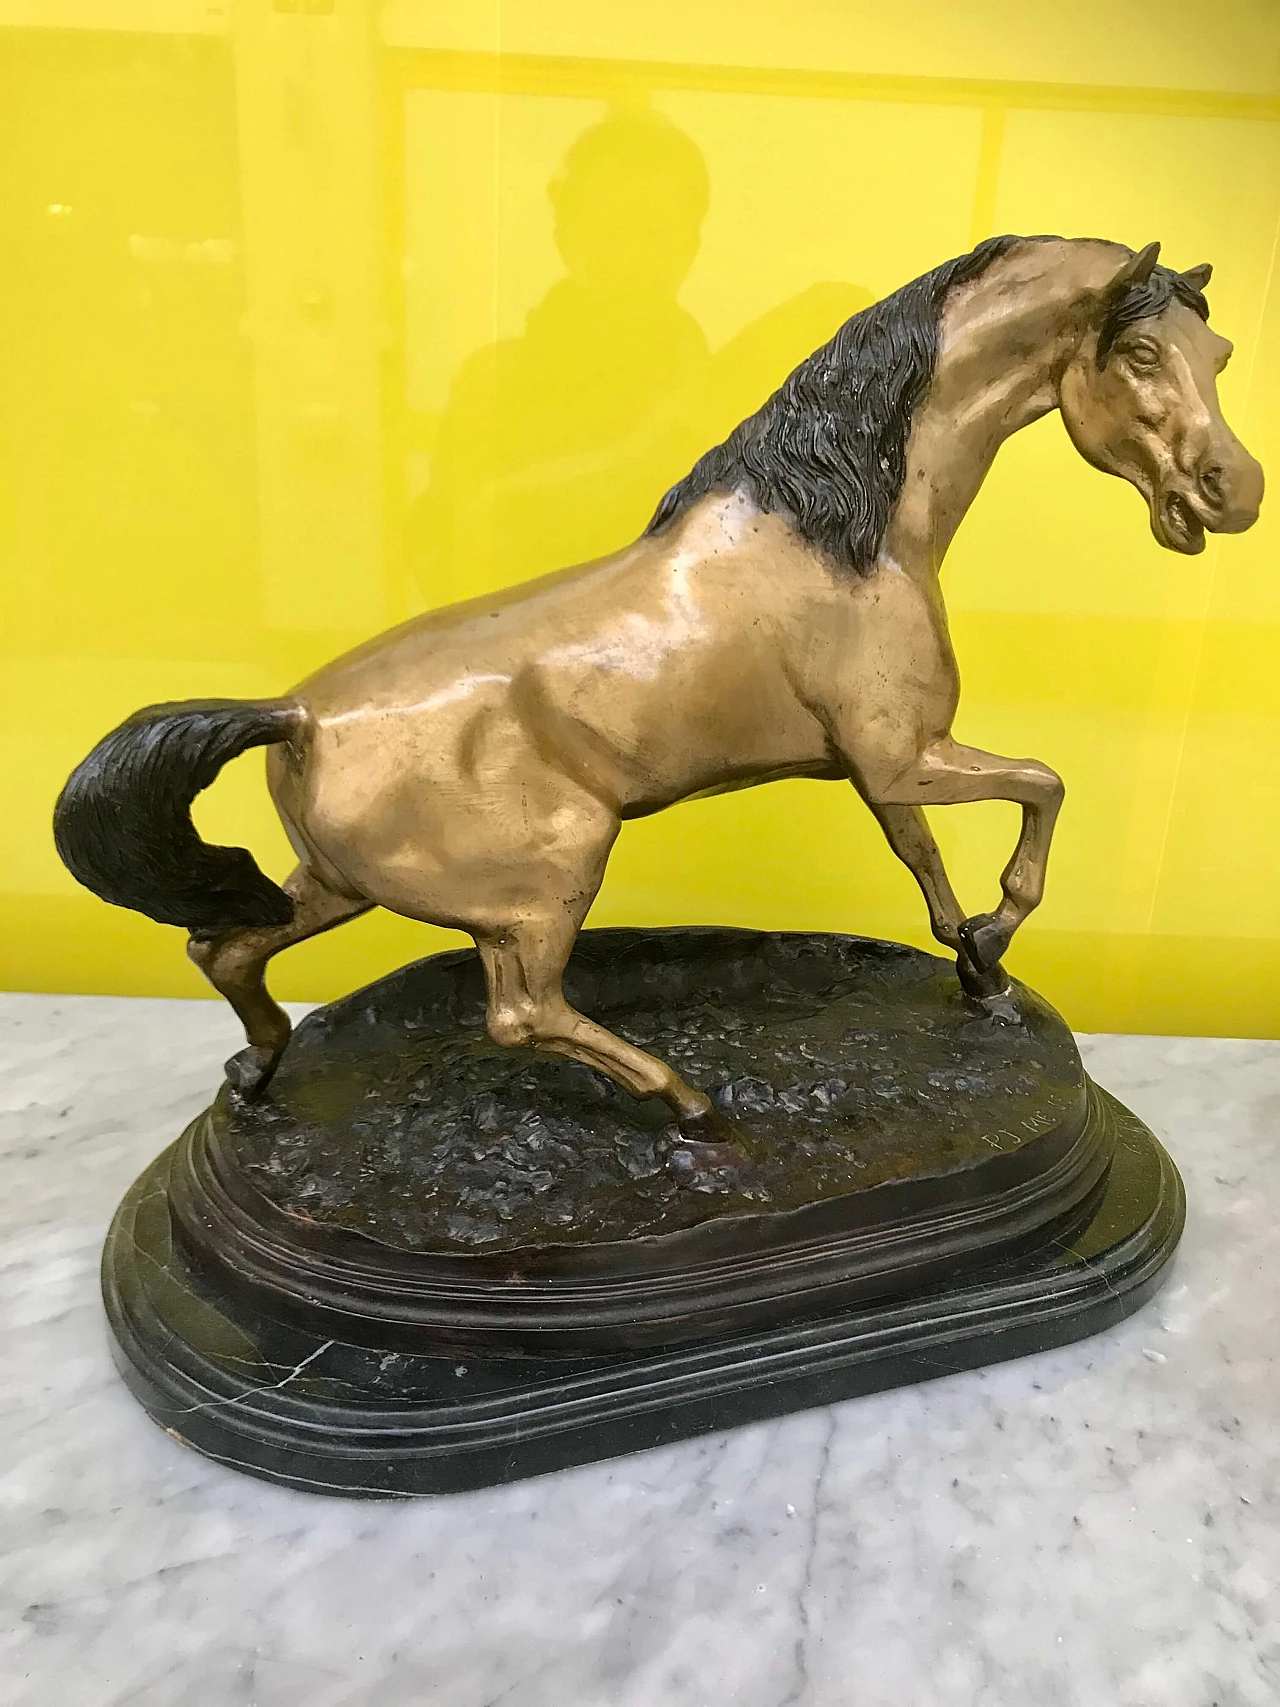 P.J.Mêne, gilded and burnished bronze sculpture of a "Horse" with black marble base, original 19th century 1177727